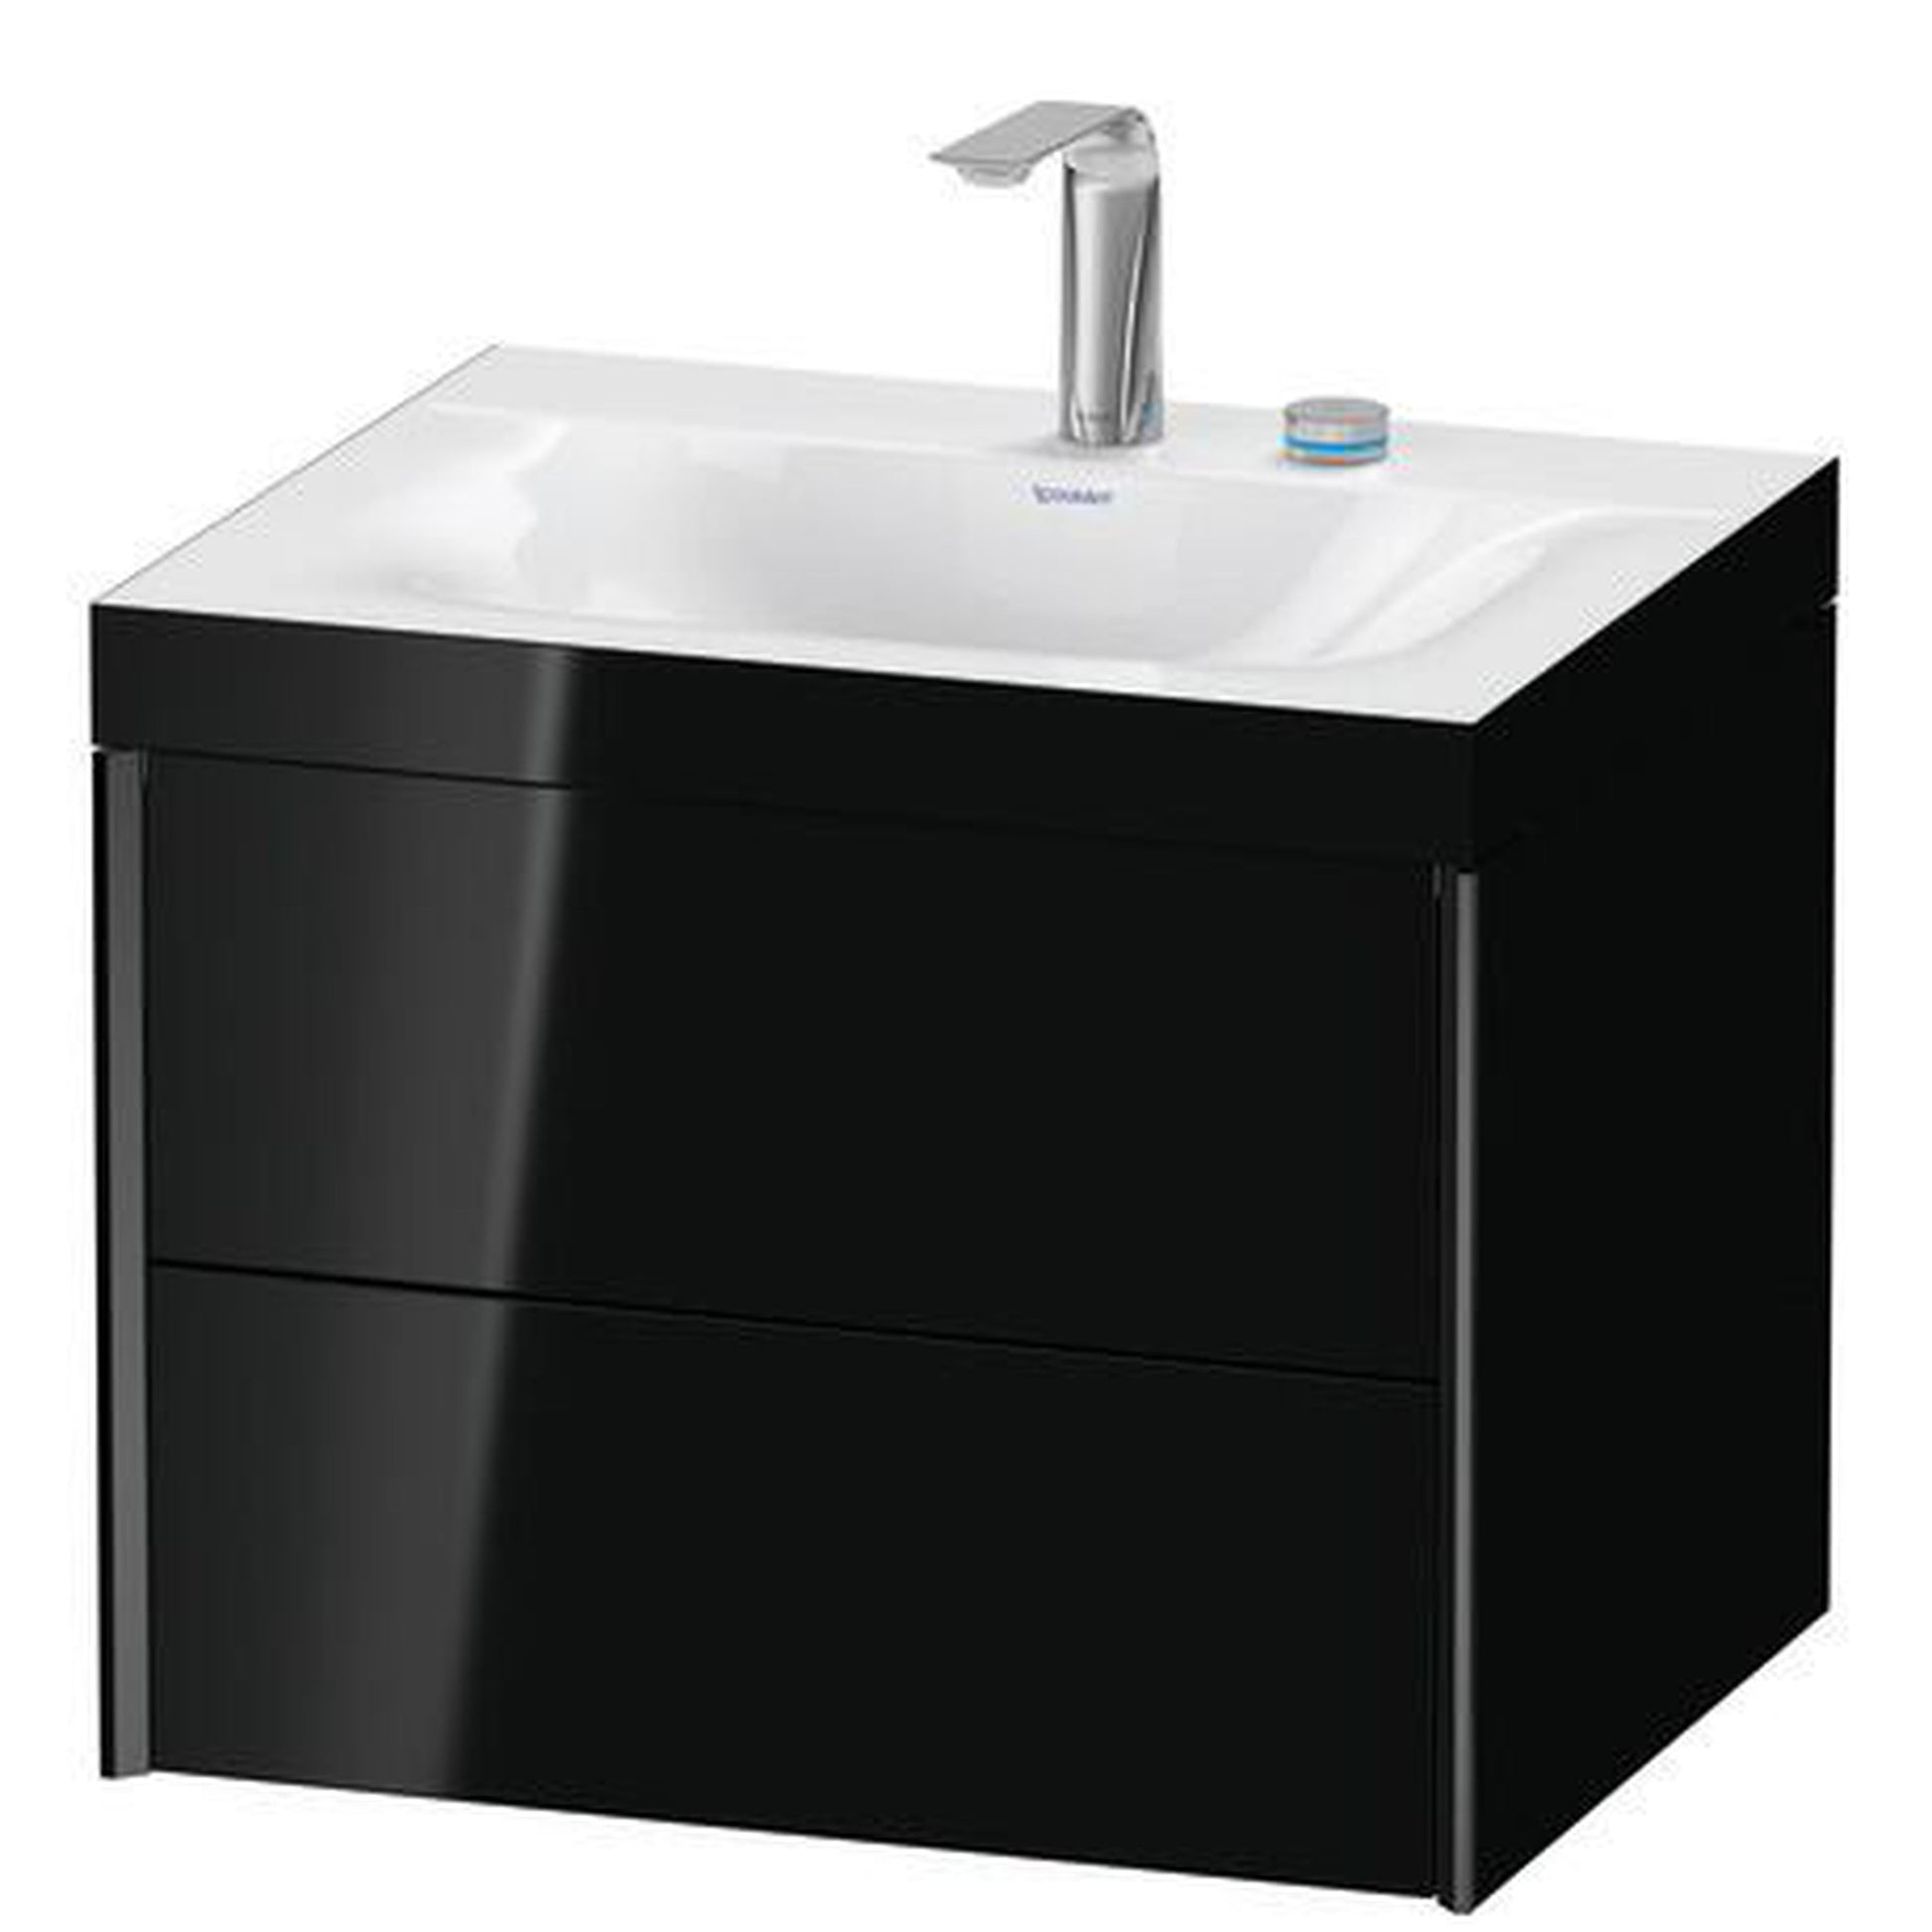 Duravit Xviu 24" x 20" x 19" Two Drawer C-Bonded Wall-Mount Vanity Kit With Two Tap Holes, Black (XV4614EB240C)